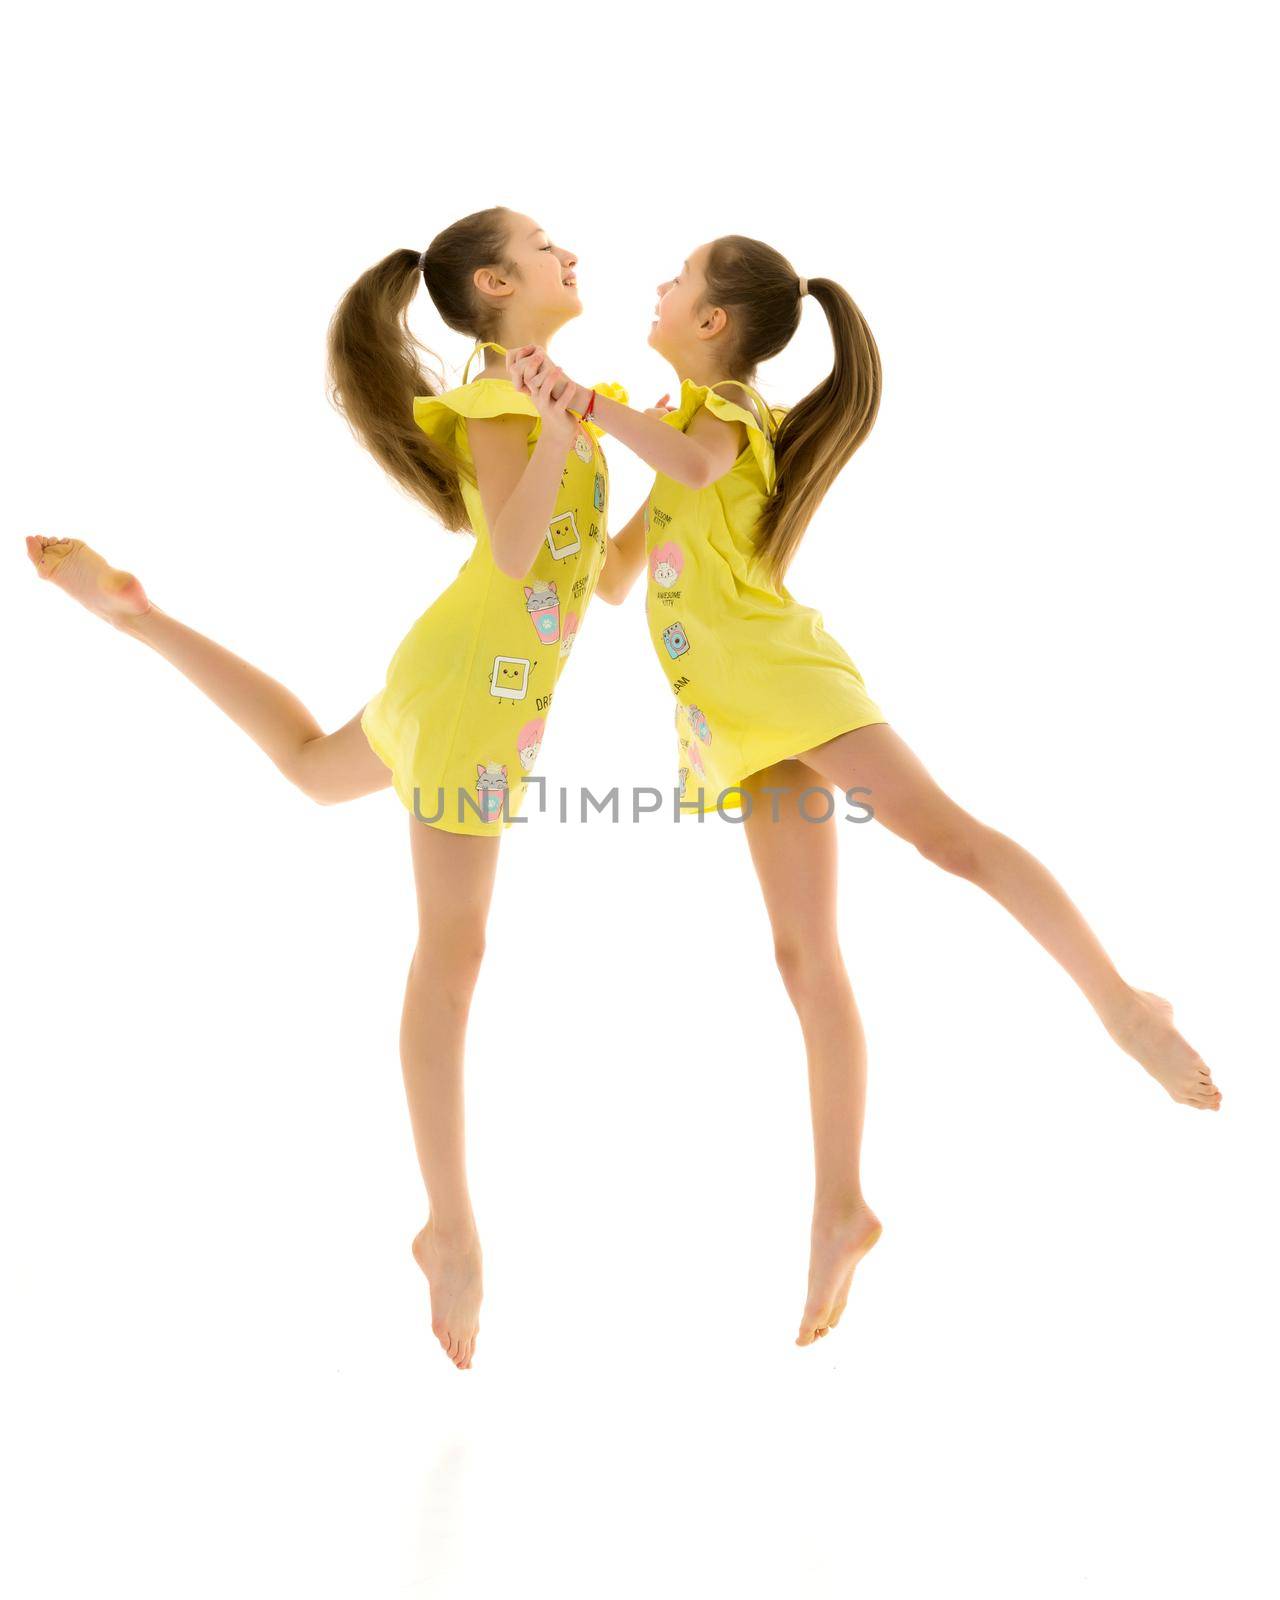 Side View of Barefoot Teen Girls Looking at Each Other Standing on One Leg on Toes, Two Beautiful Sisters Wearing Yellow Short Dresses, Full Length Portrait of Teenagers Isolated on White Background.